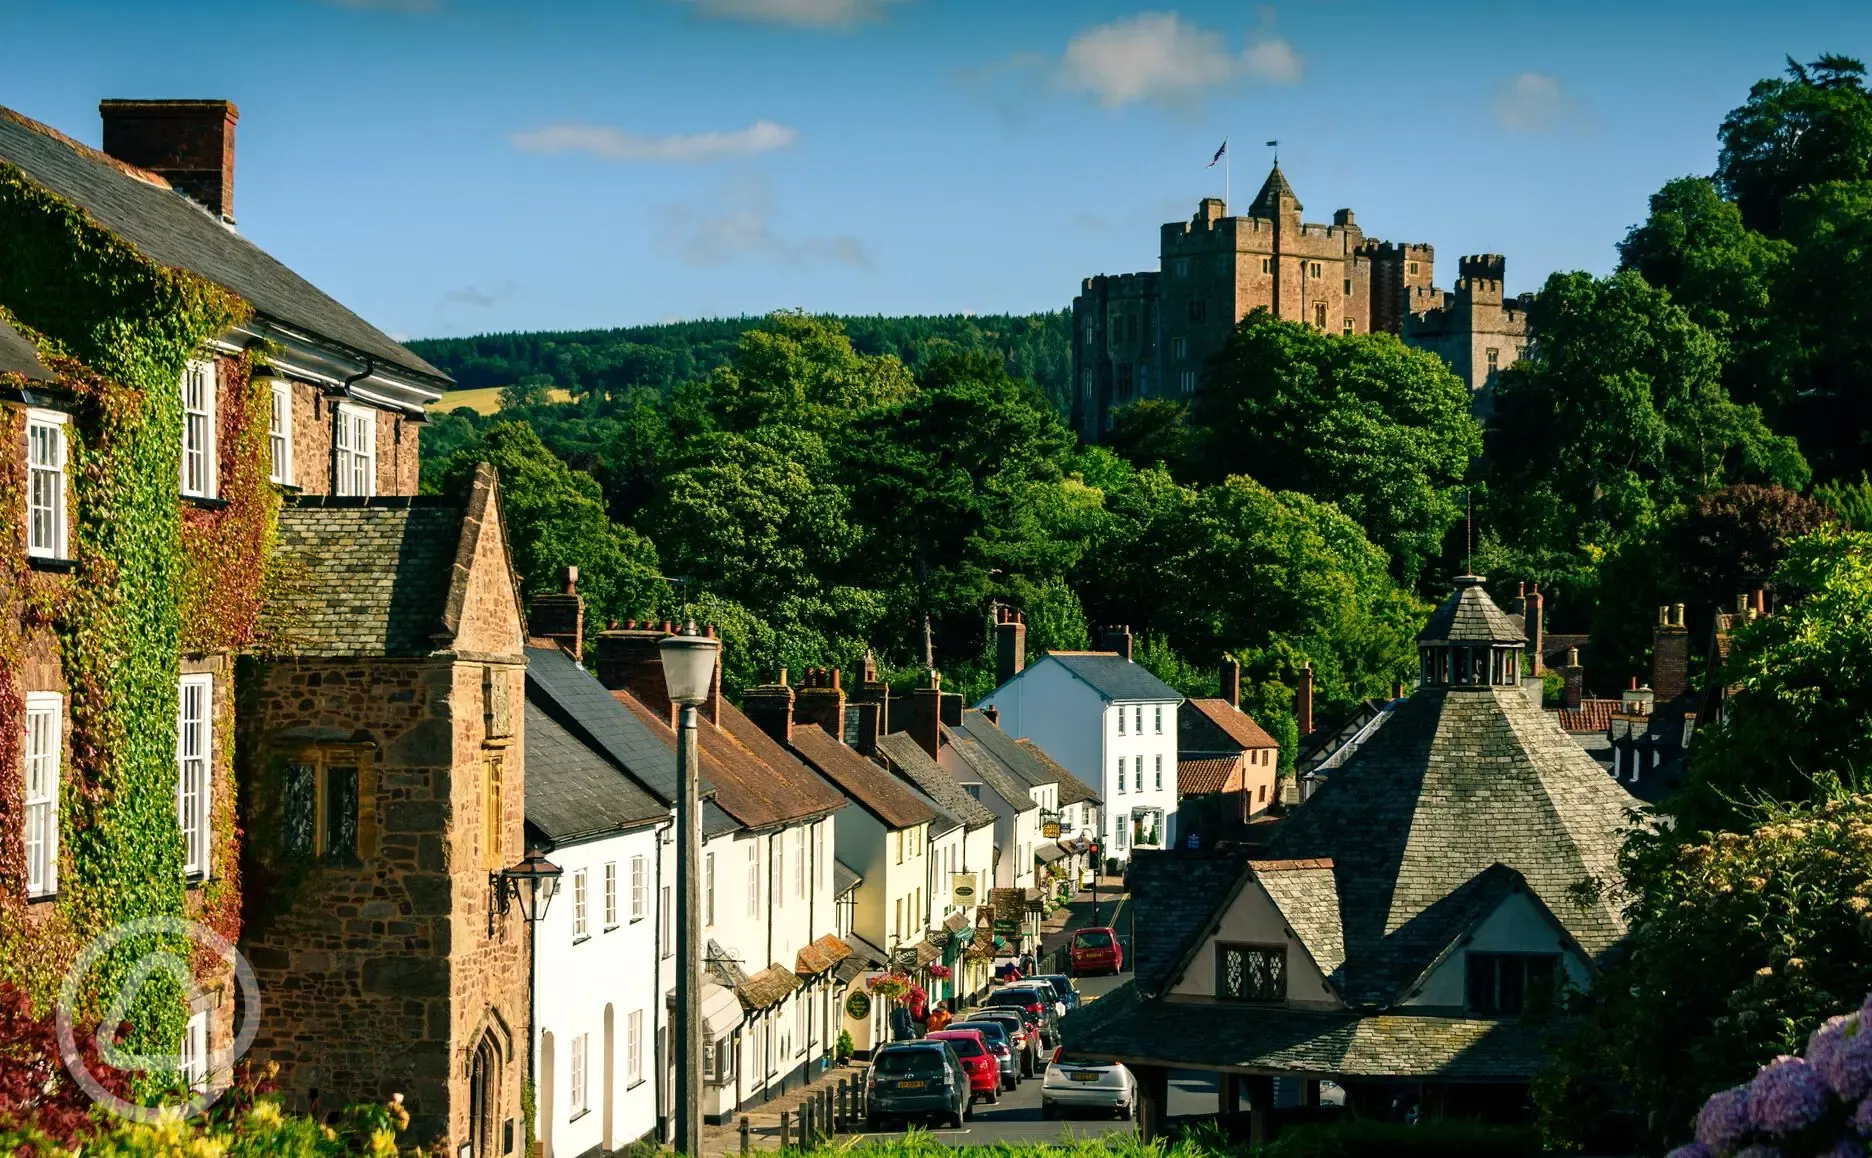 The famous Dunster Castle and village is a great day out 